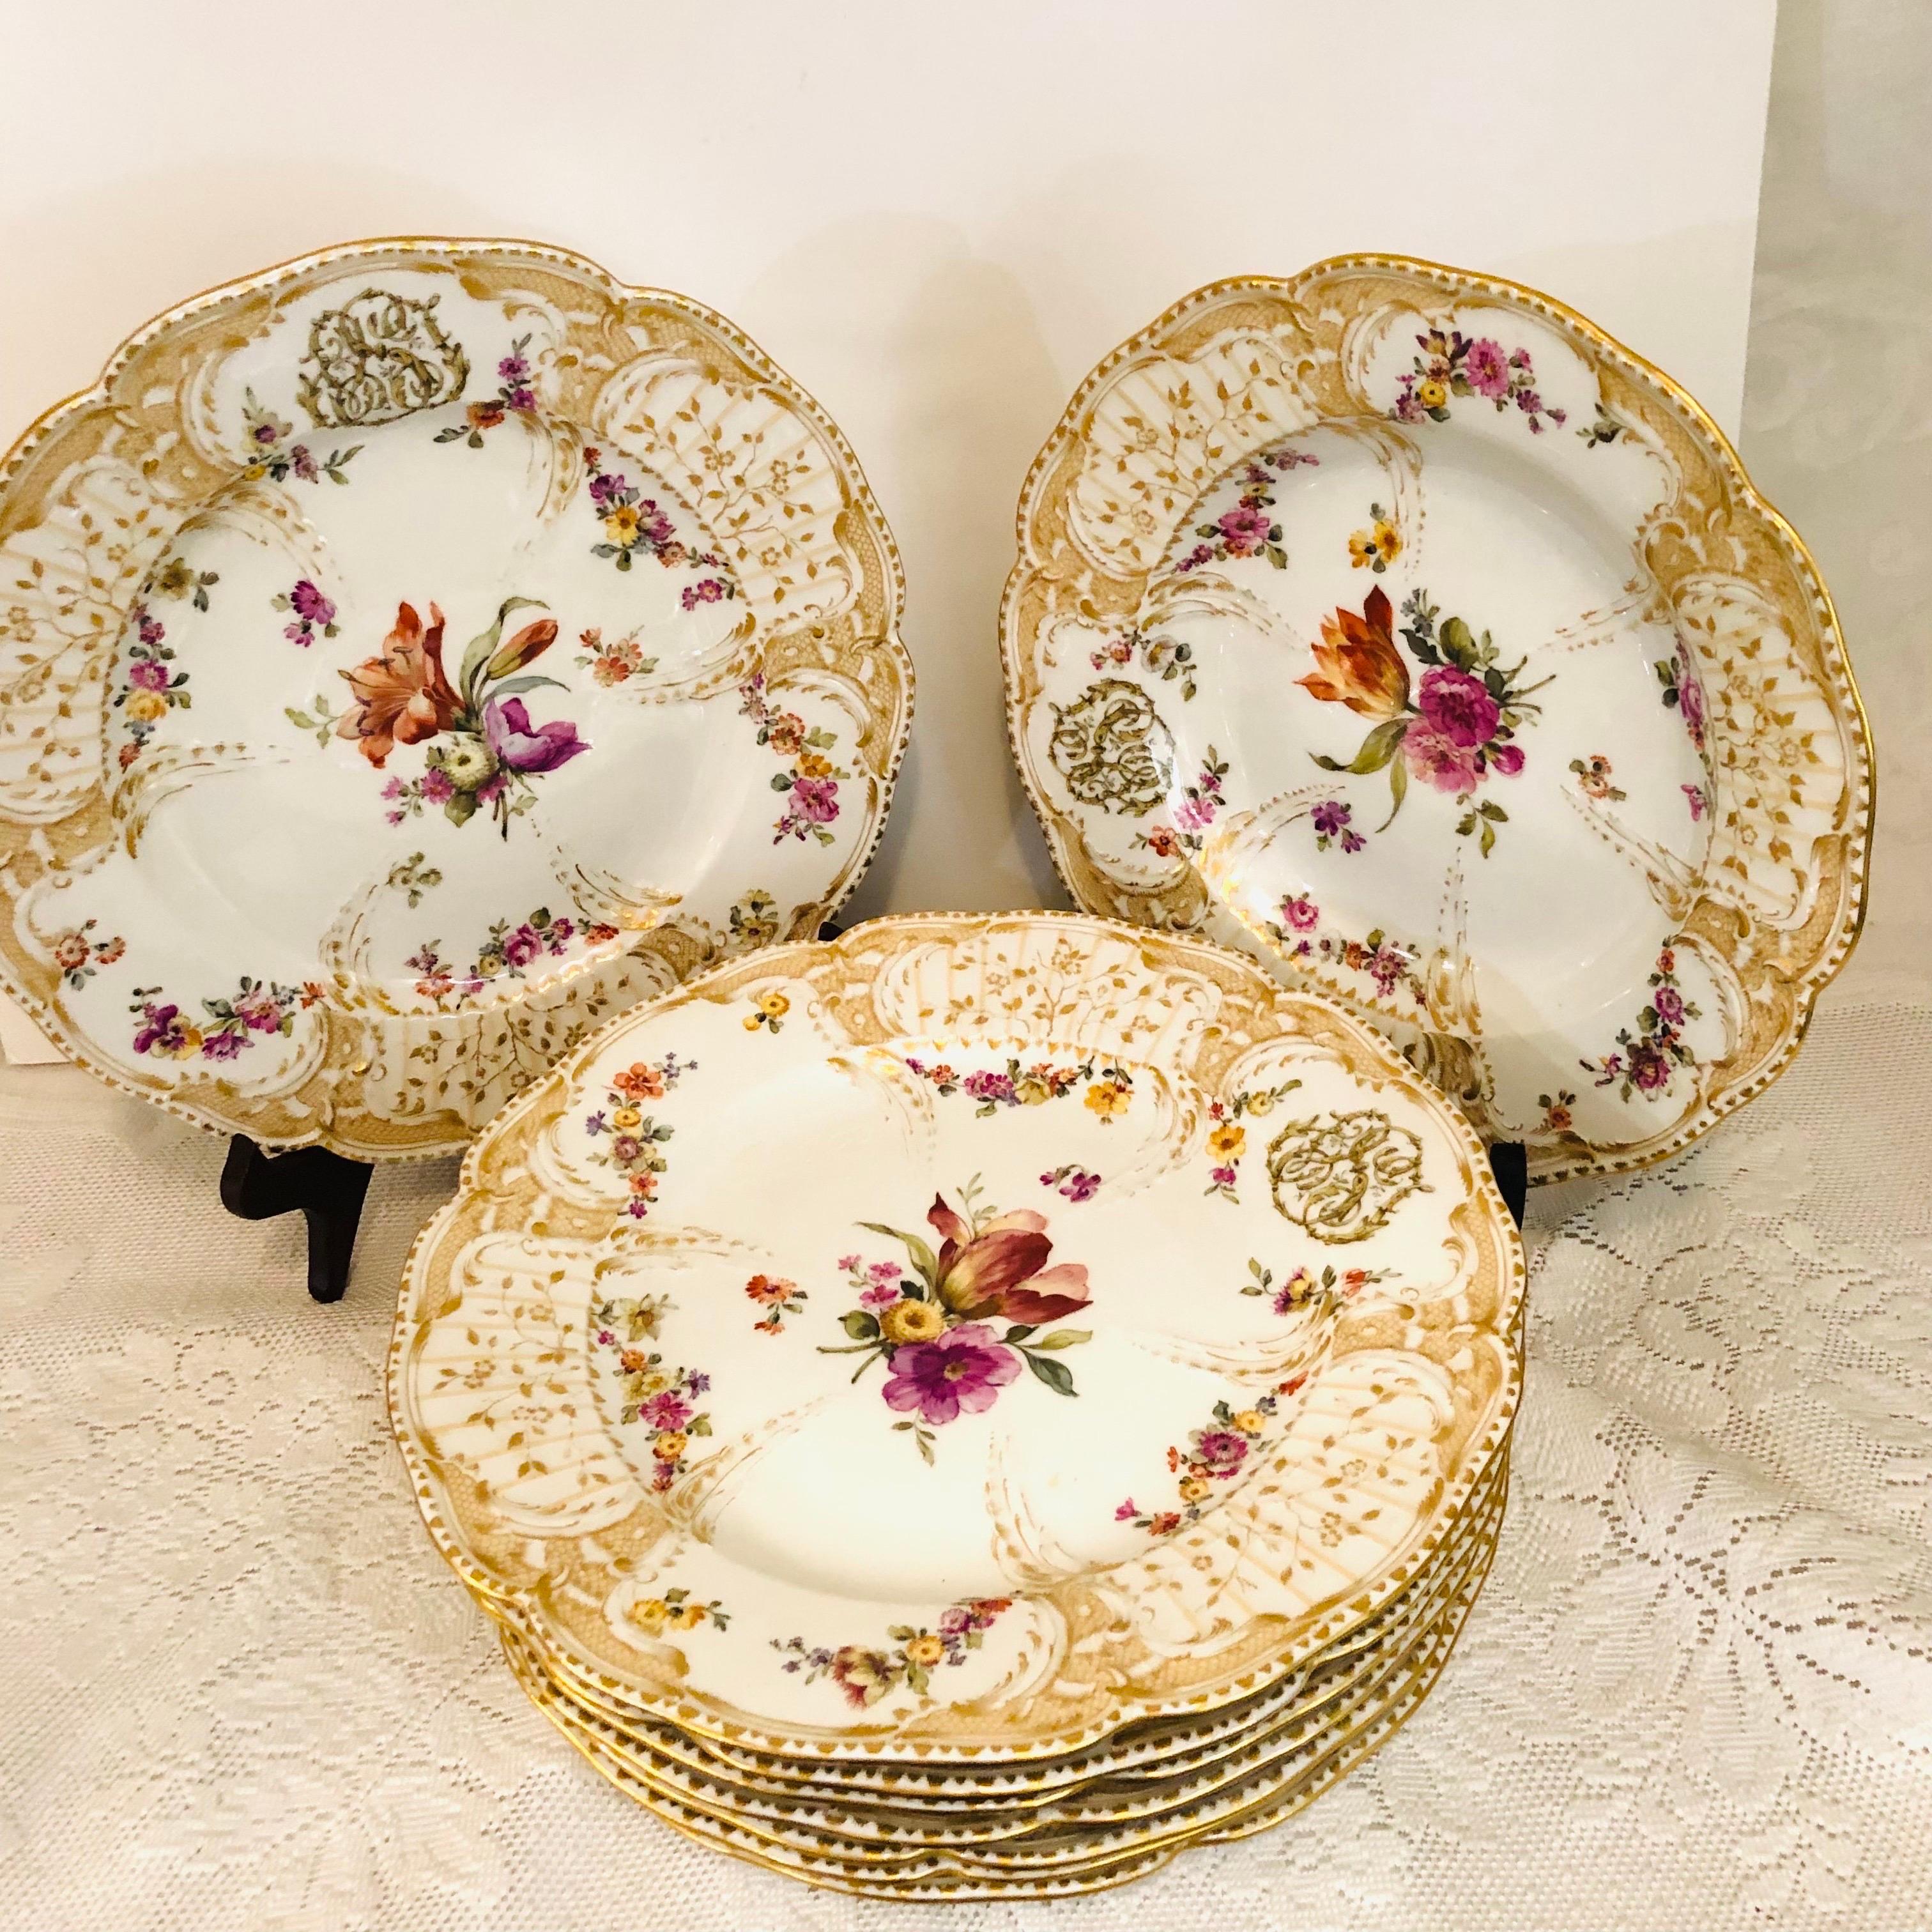 8 KPM Dinner Plates & Rim Soups in the Manner of the Potsdam Service 11